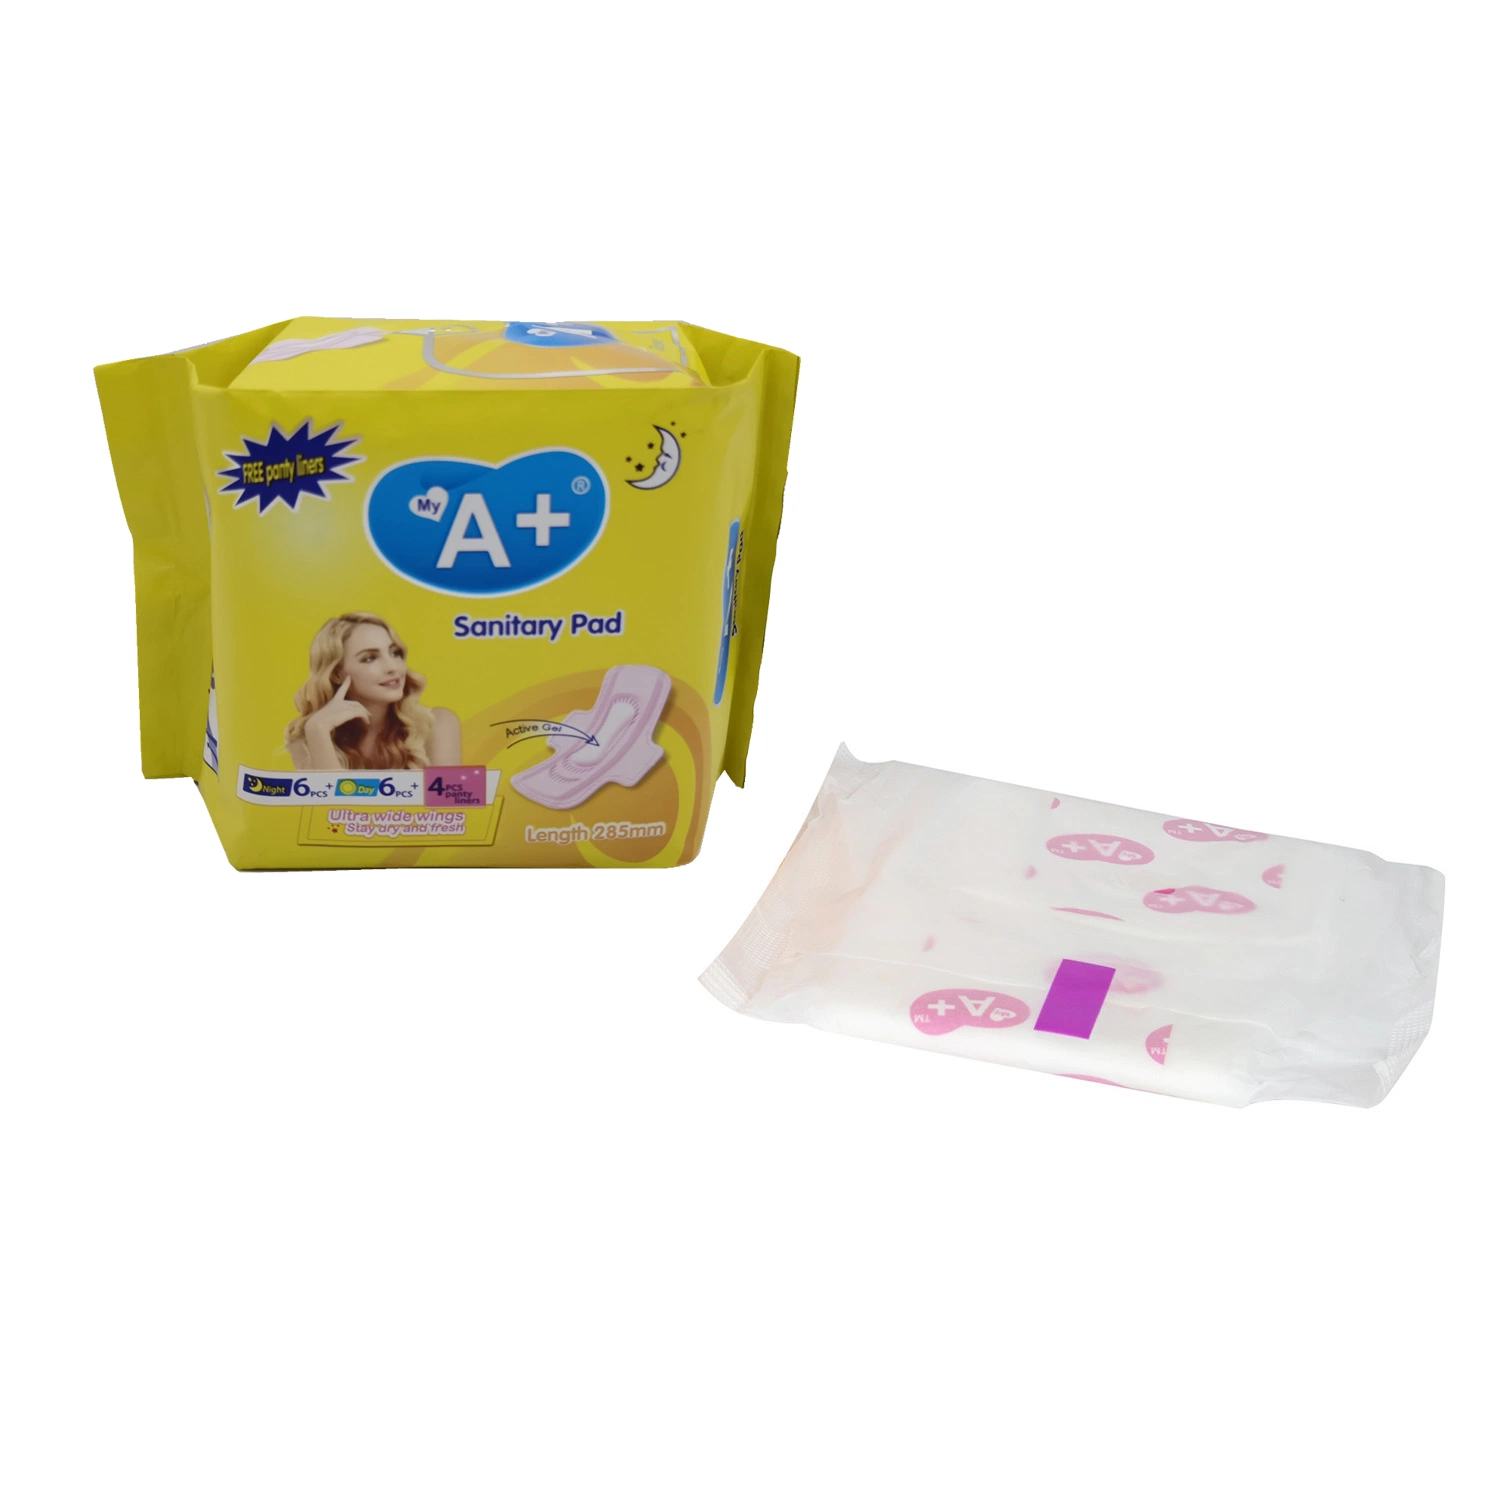 Day Use Night Use 240mm 280mm Sanitary Pads Napkin Period Pad for Ladies Sanitary Towel 2023